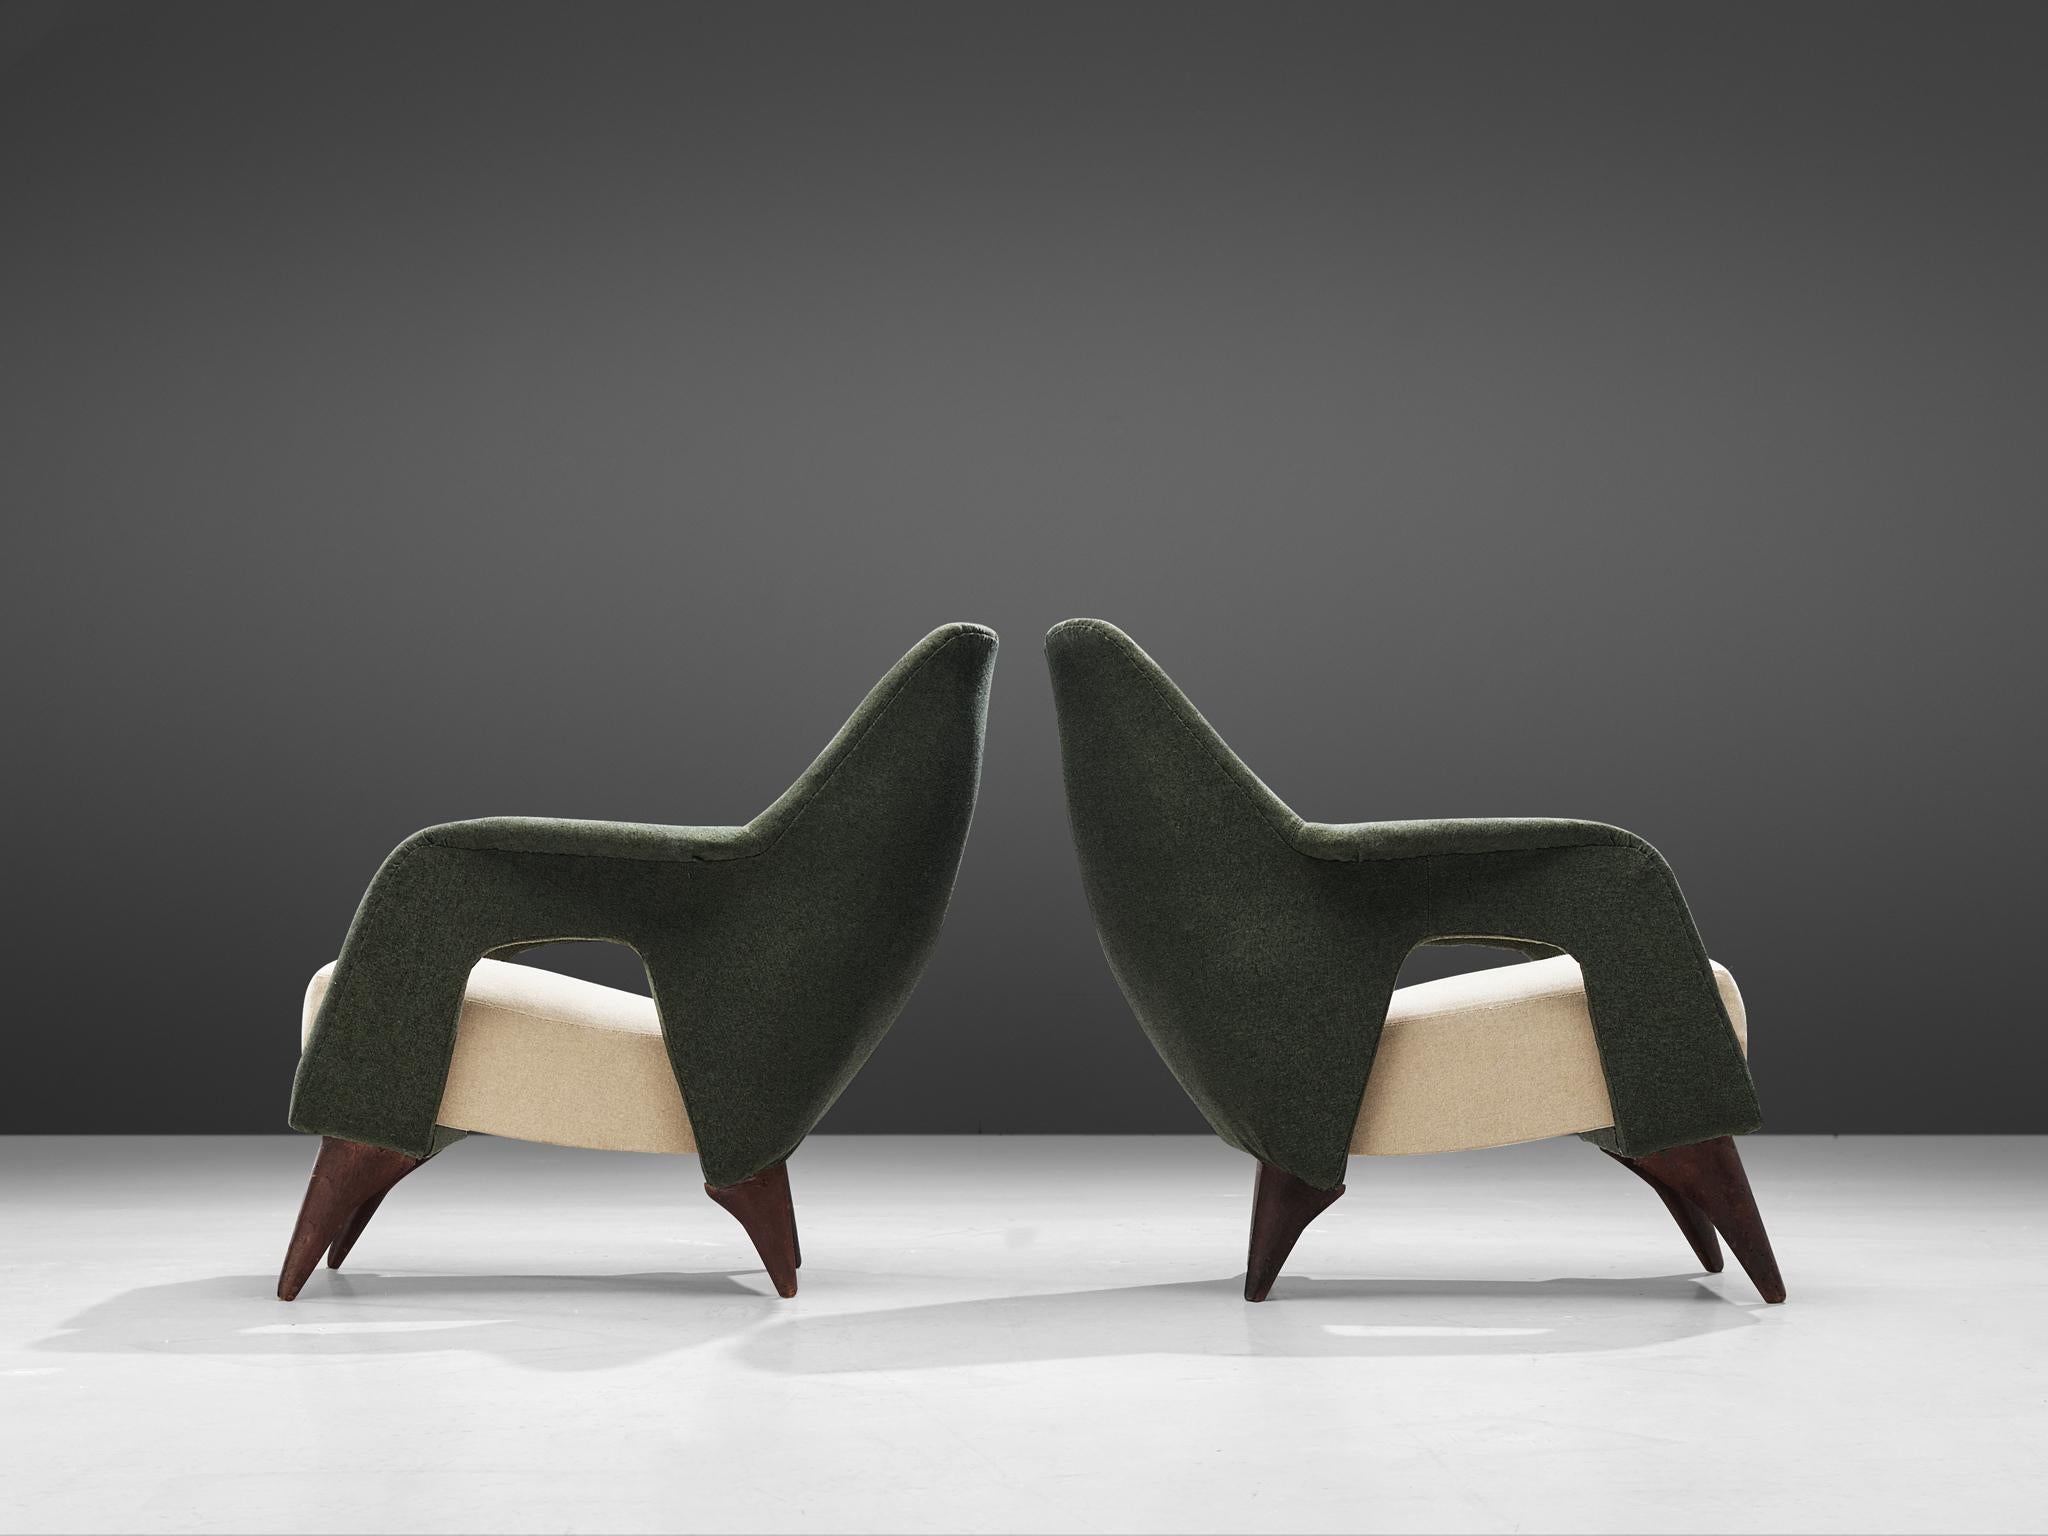 Mid-20th Century Pair of Italian Lounge Chairs in Forrest Green and Off-White Upholstery